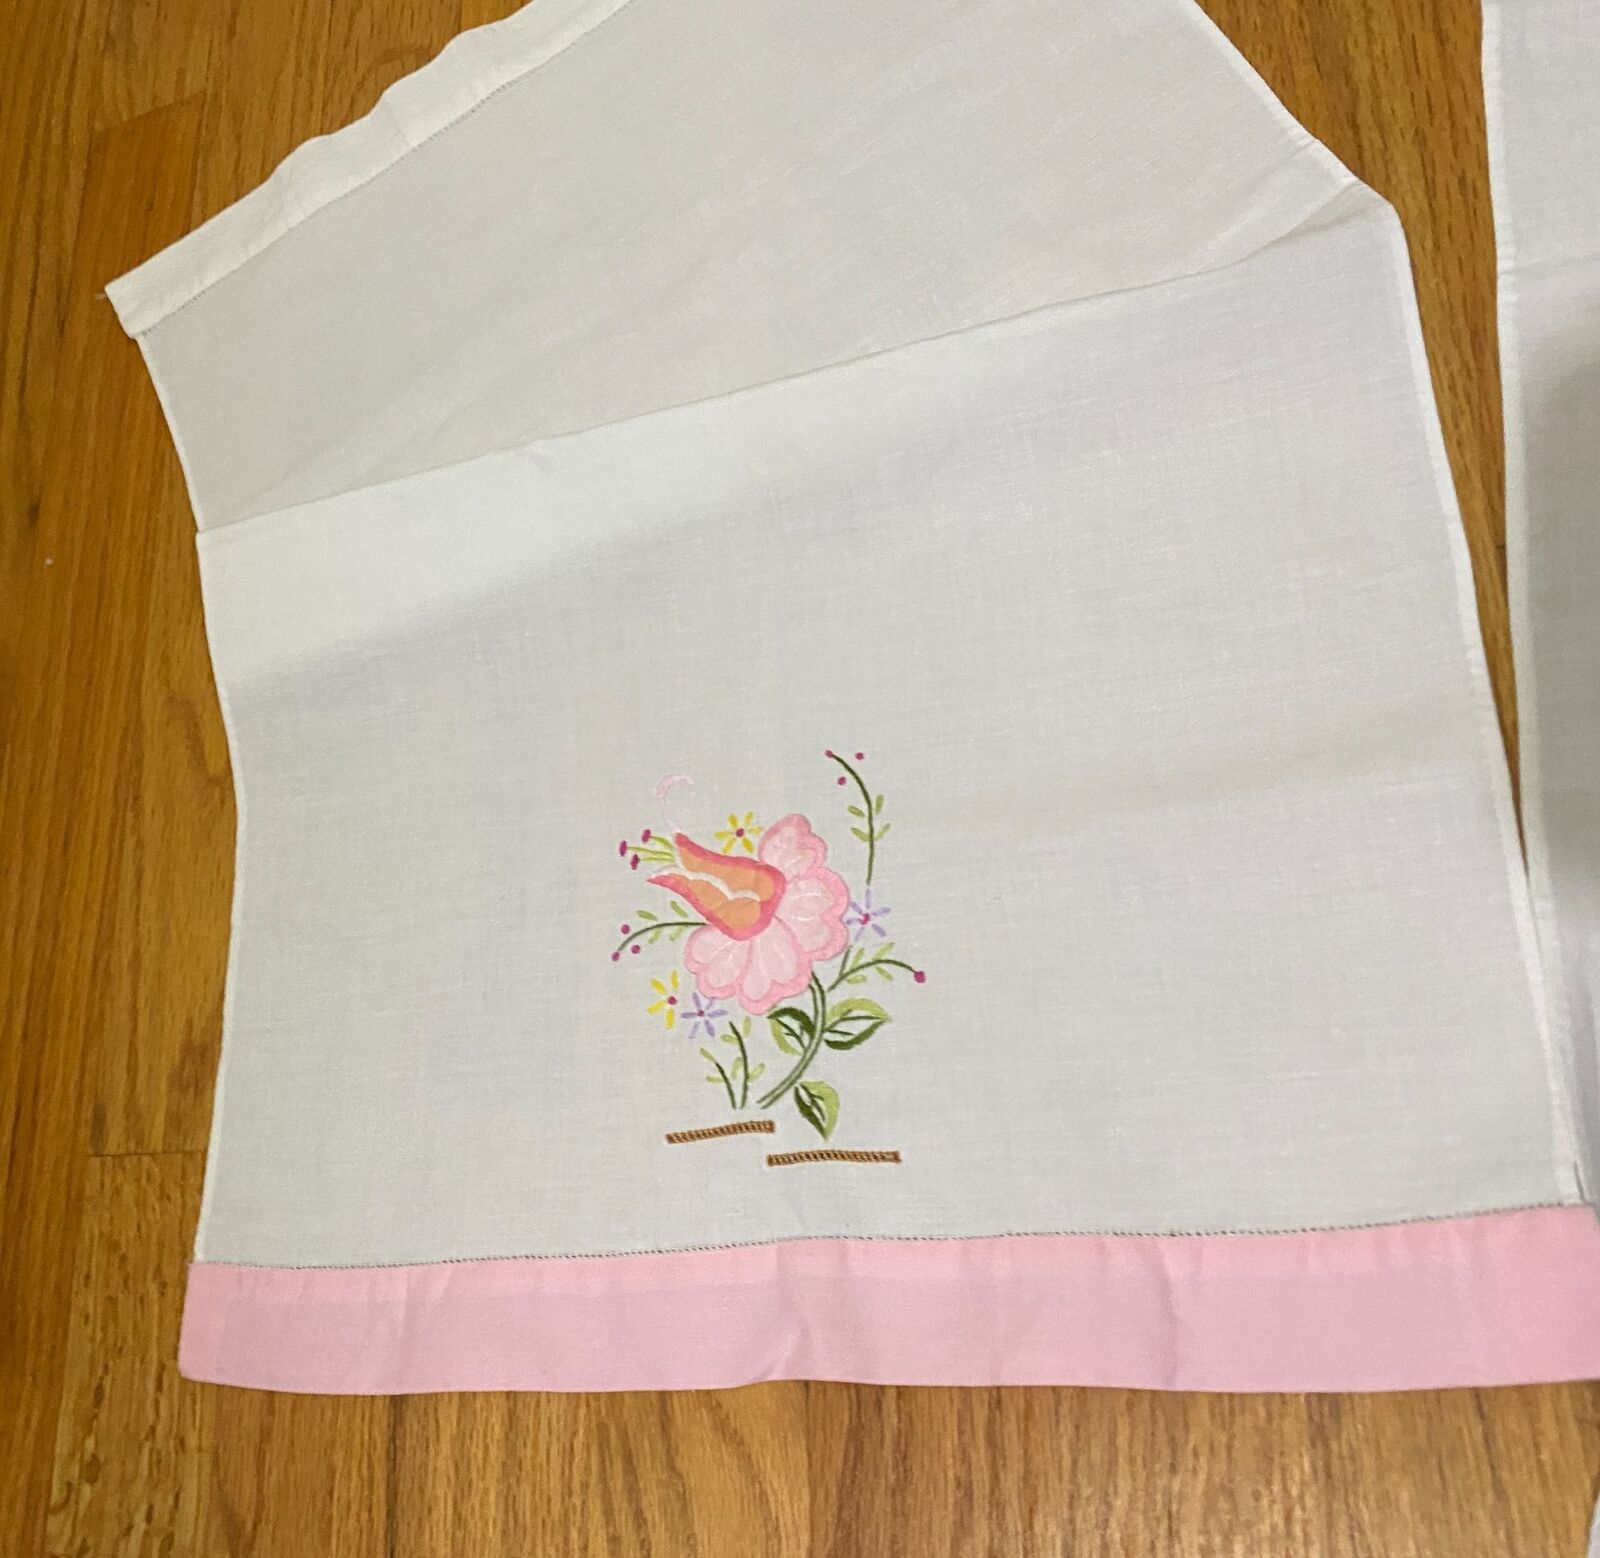 Hand Made, Machine Embroidered Applique Floral Pink Trim Cotten Tea Towels